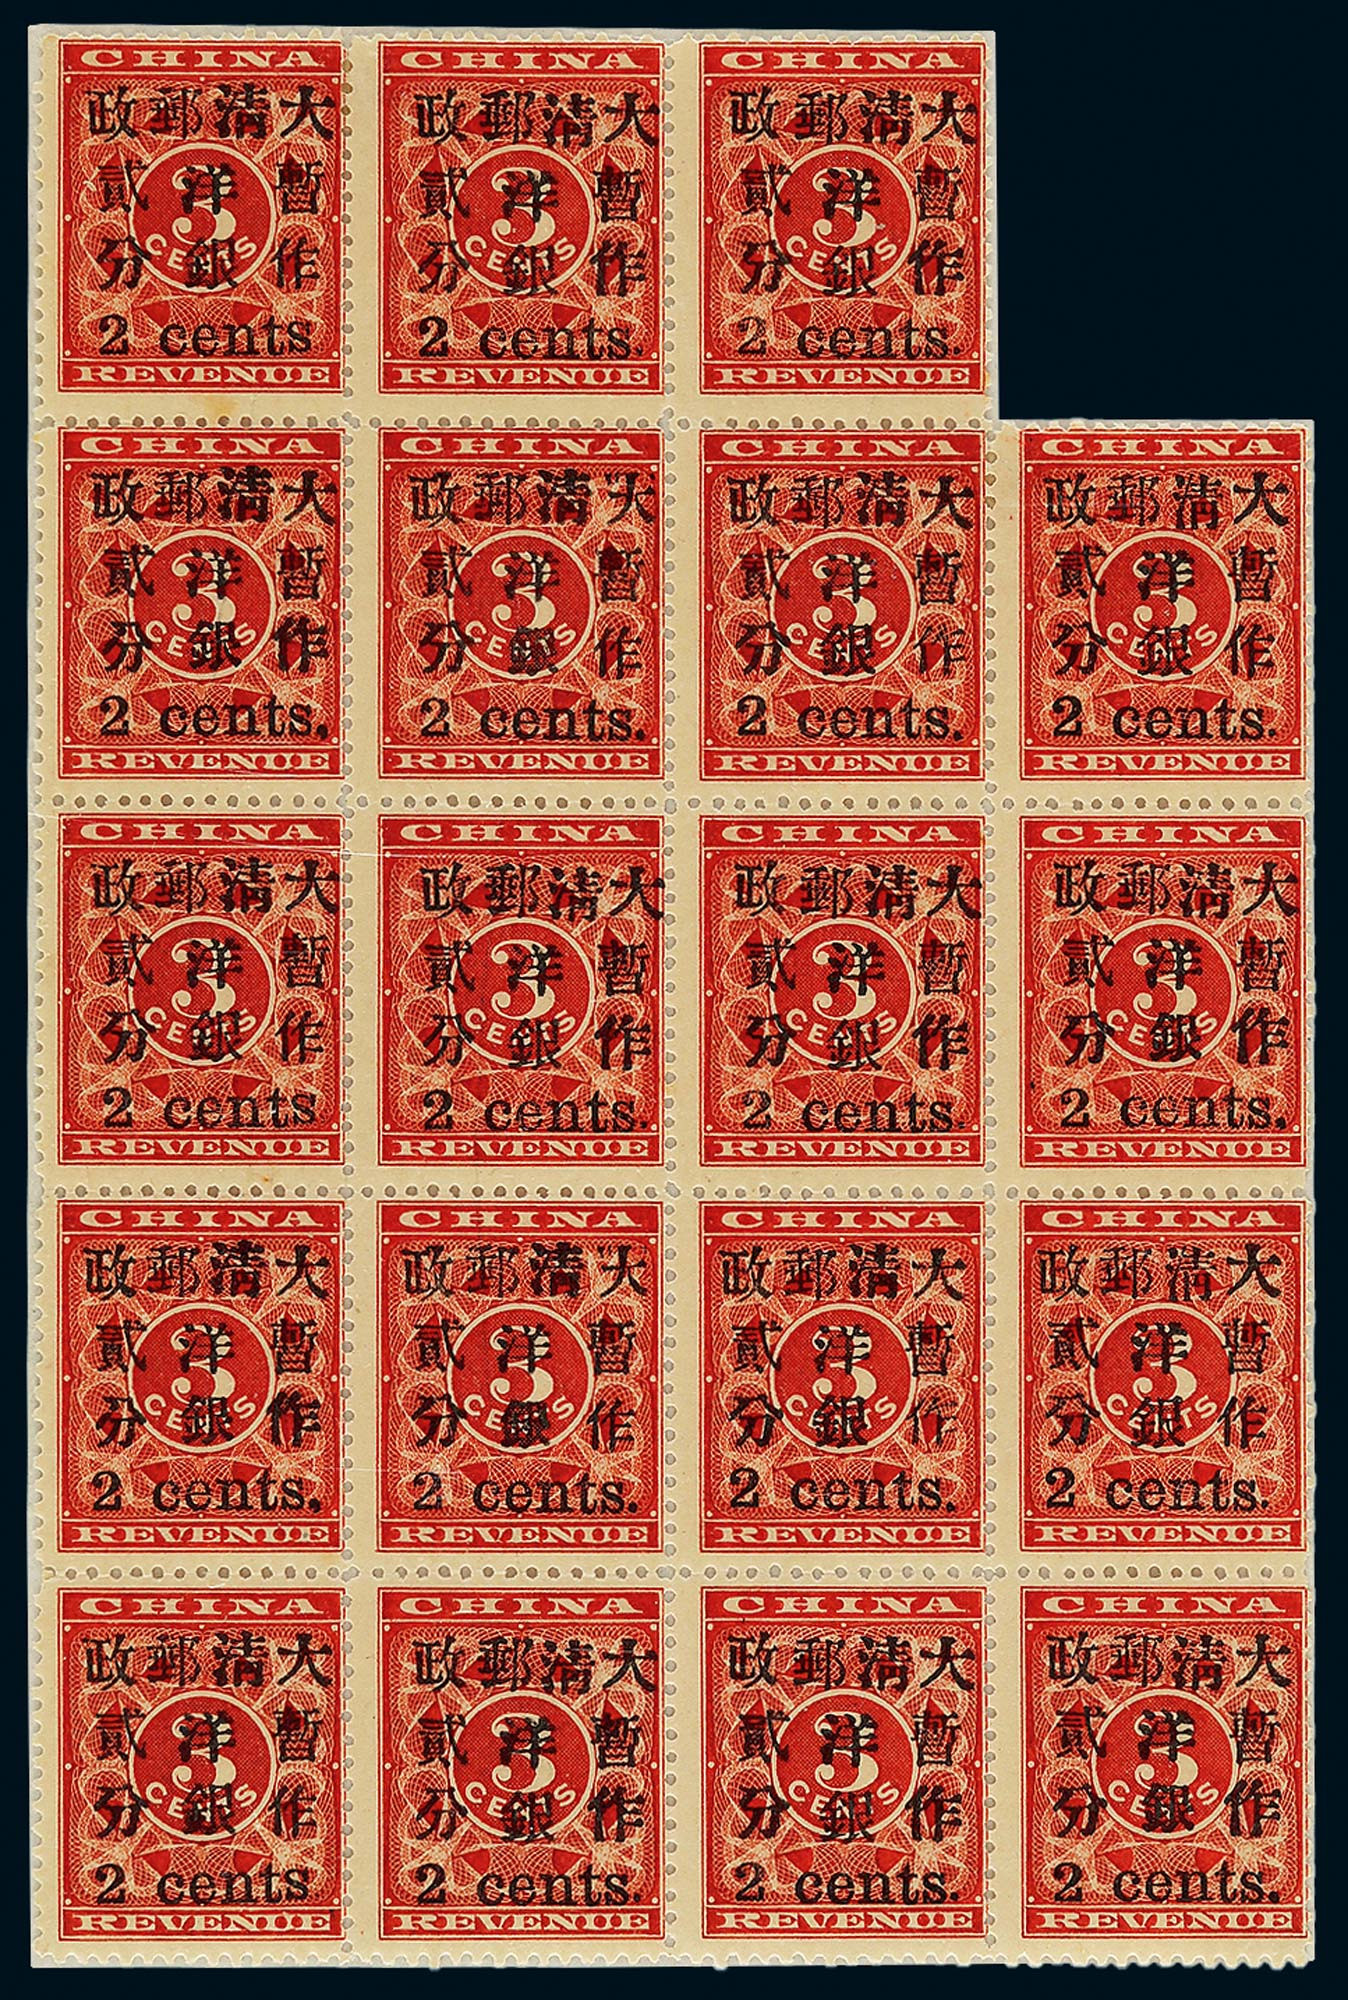 1897 Red Renvenue Small 2 Cents mint cross setting overprint in block of 19. Extremely fine mint or MNH. Rare multiples.